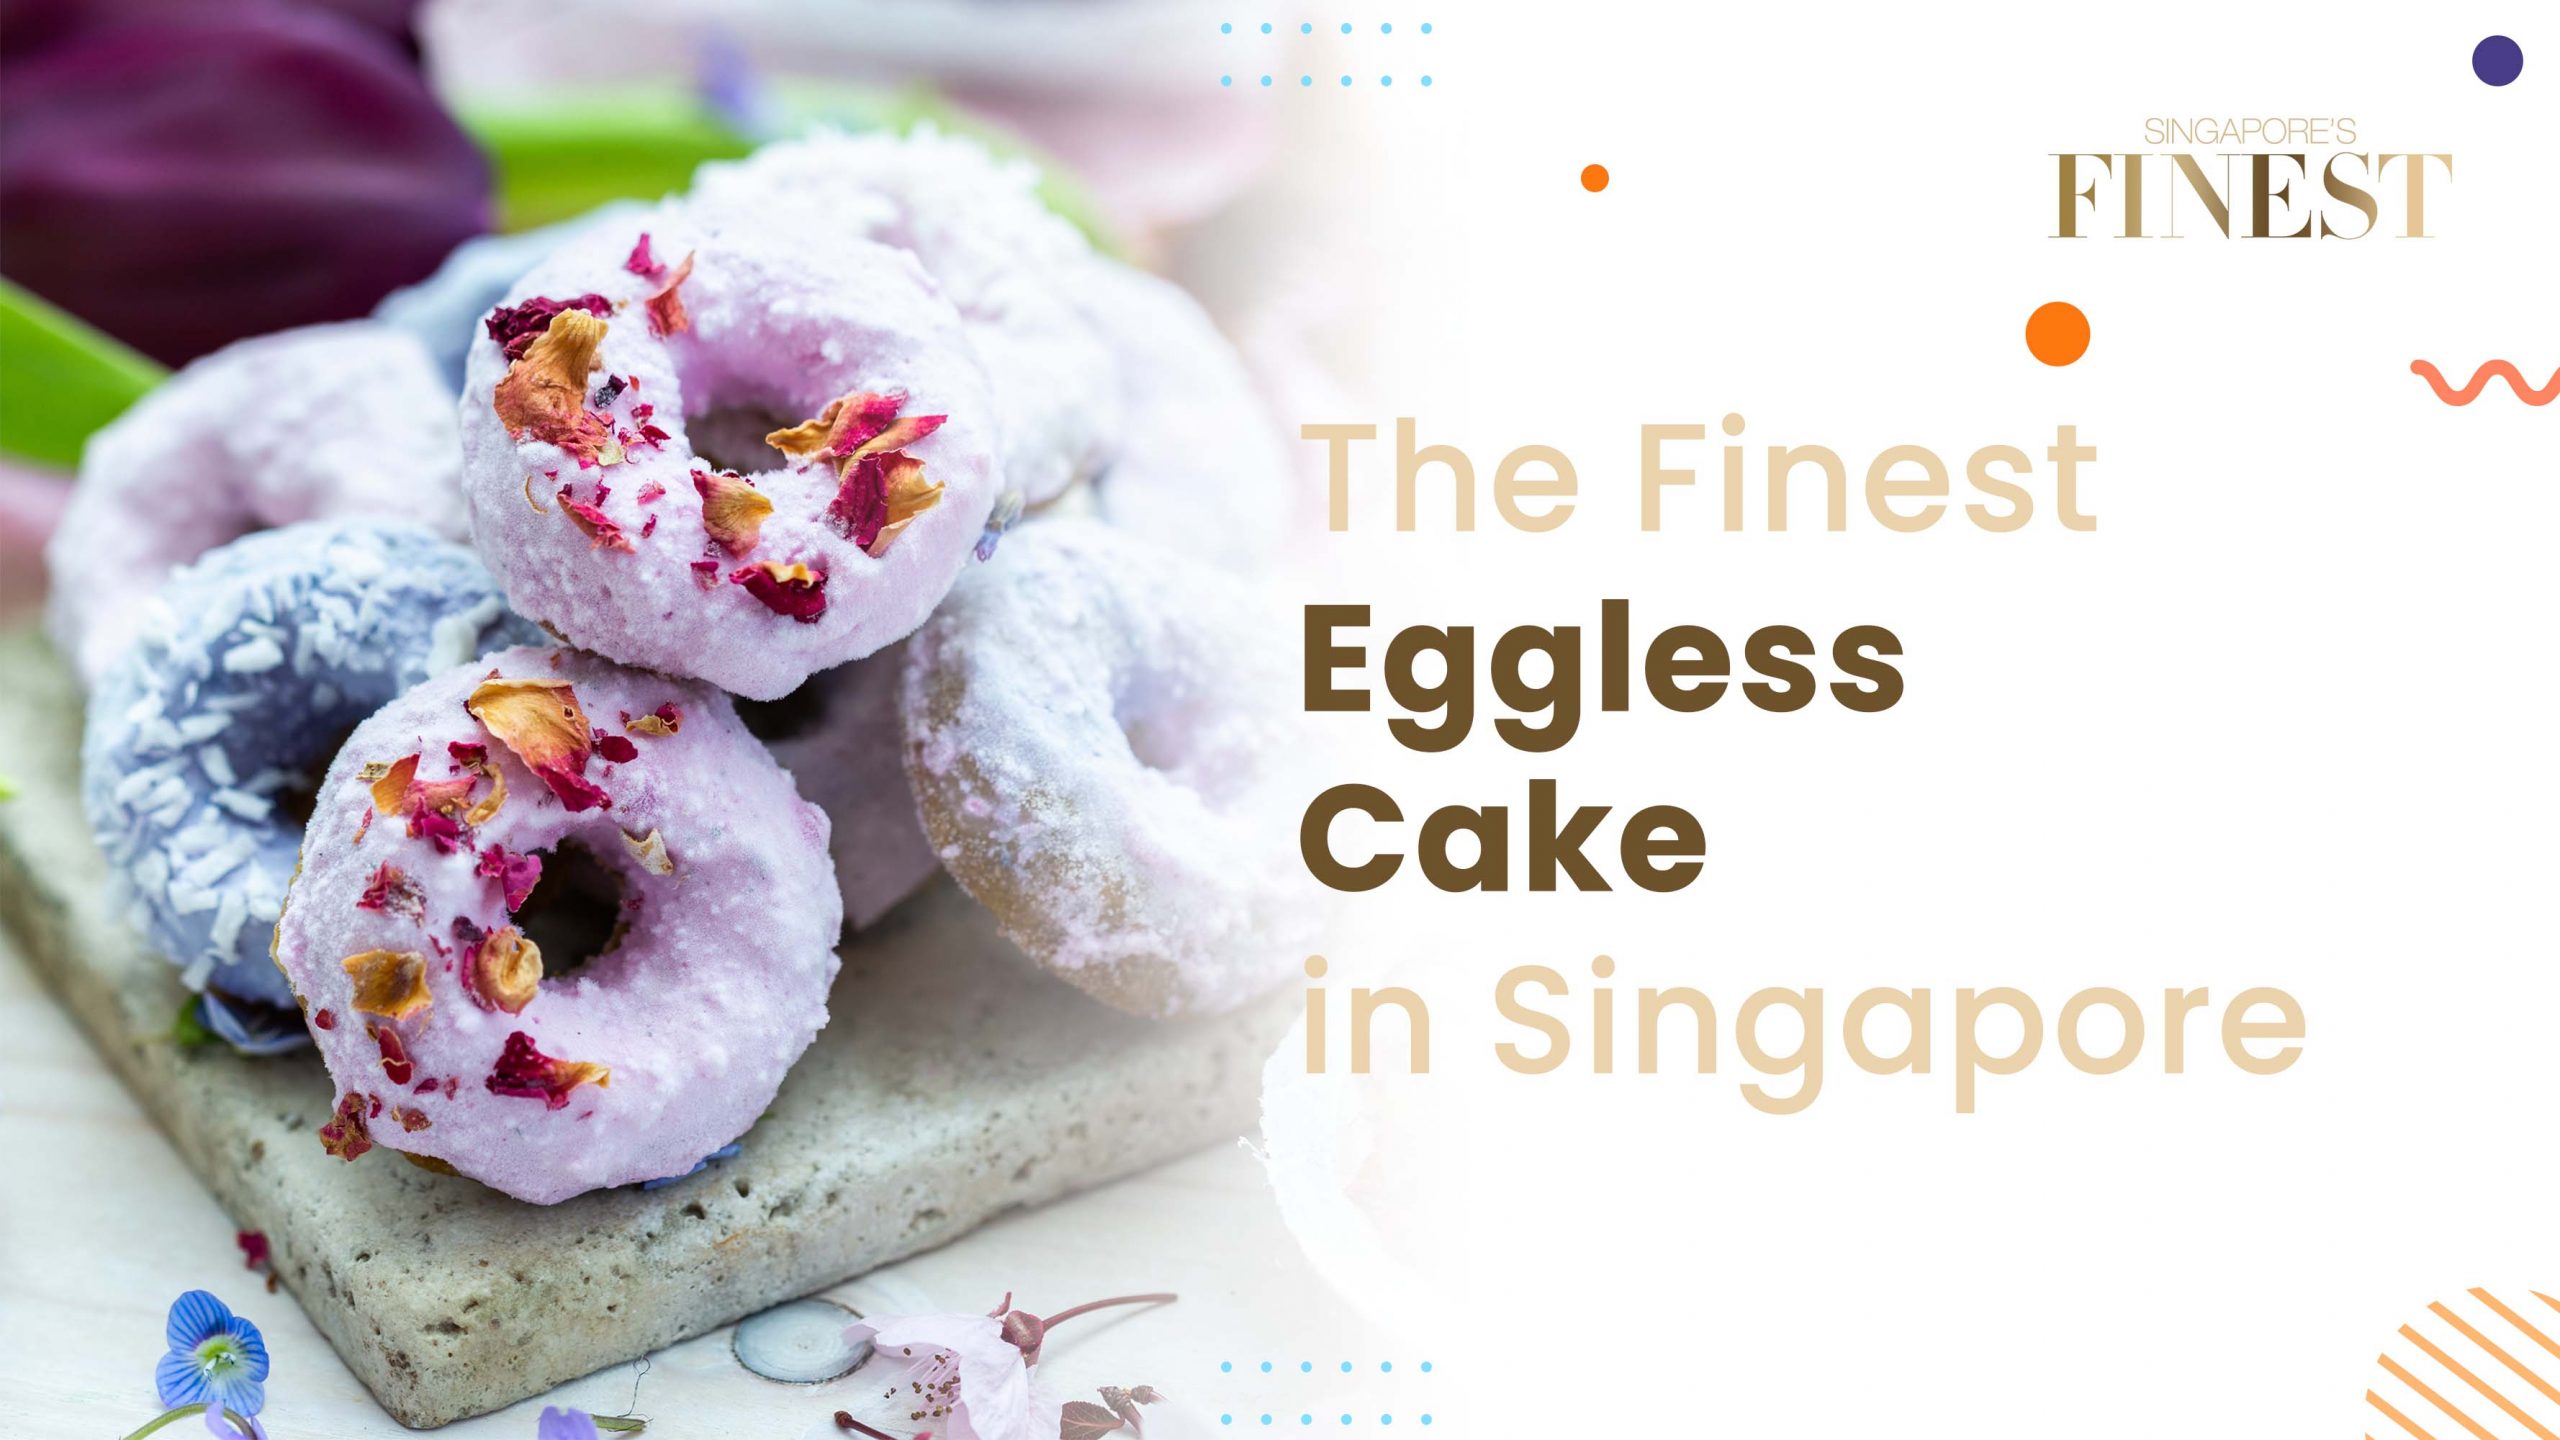 Finest Eggless Cake in Singapore